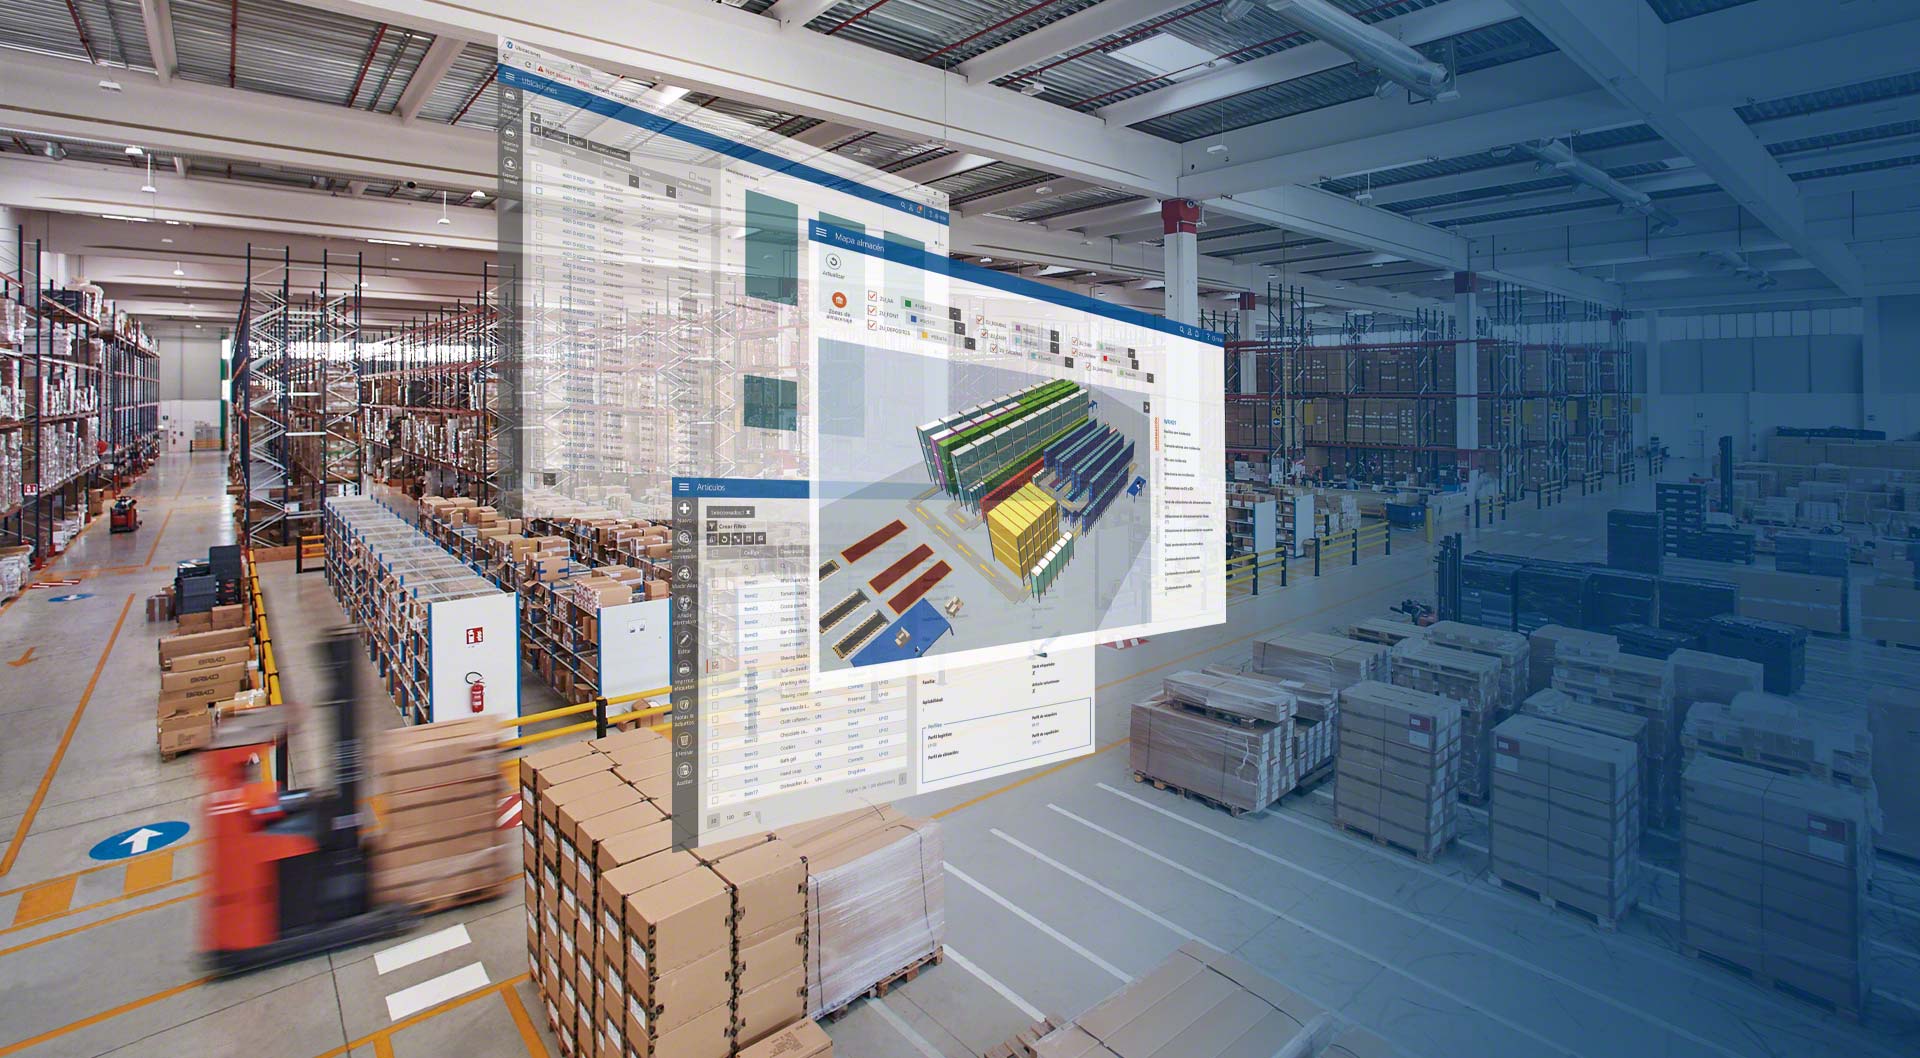 Predictive analytics has become a widely used tool for improving logistics